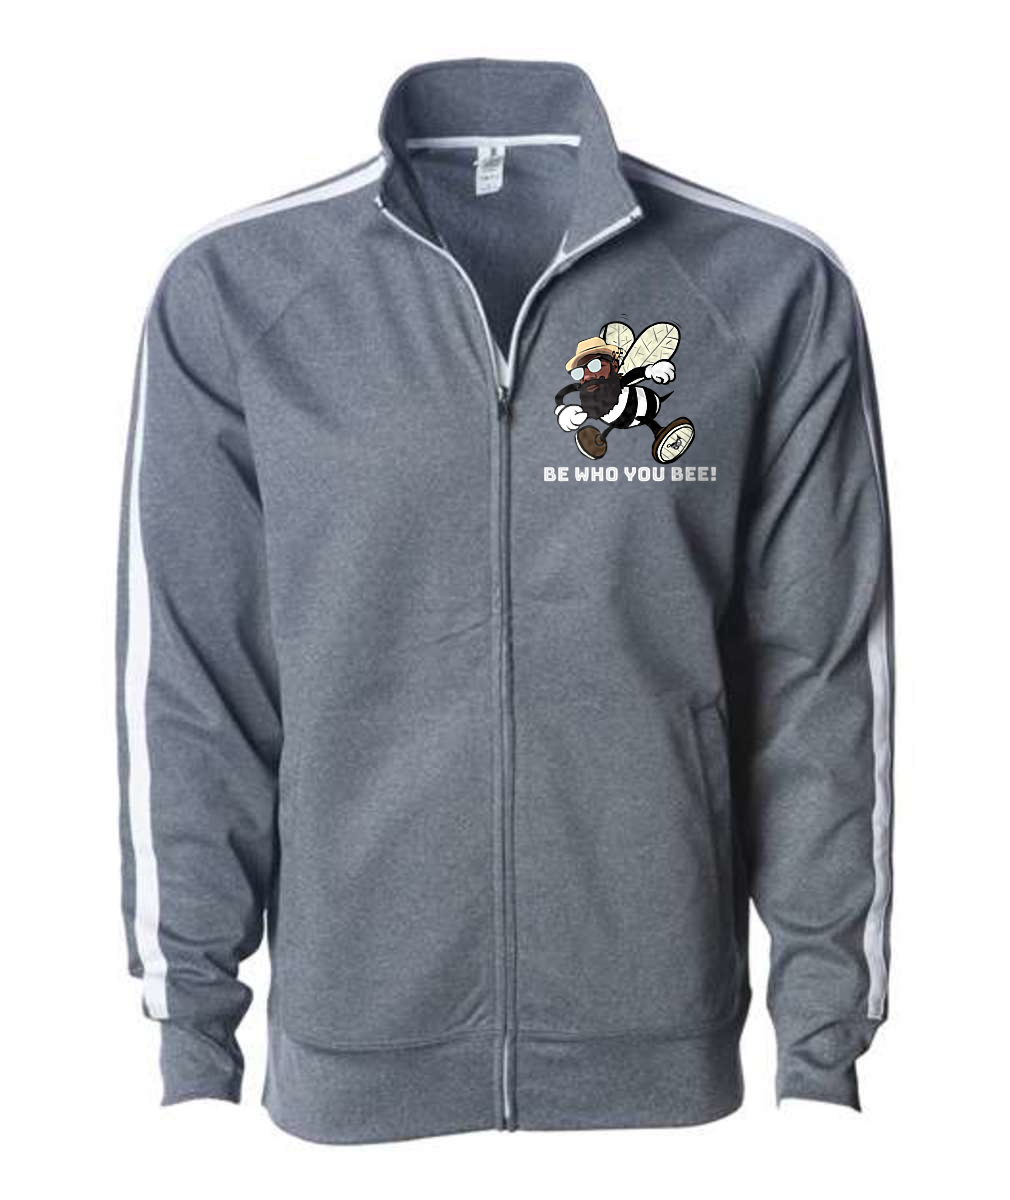 Be Who You Bee Embroidered Unisex Lightweight Poly-Tech Full-Zip Track Jacket